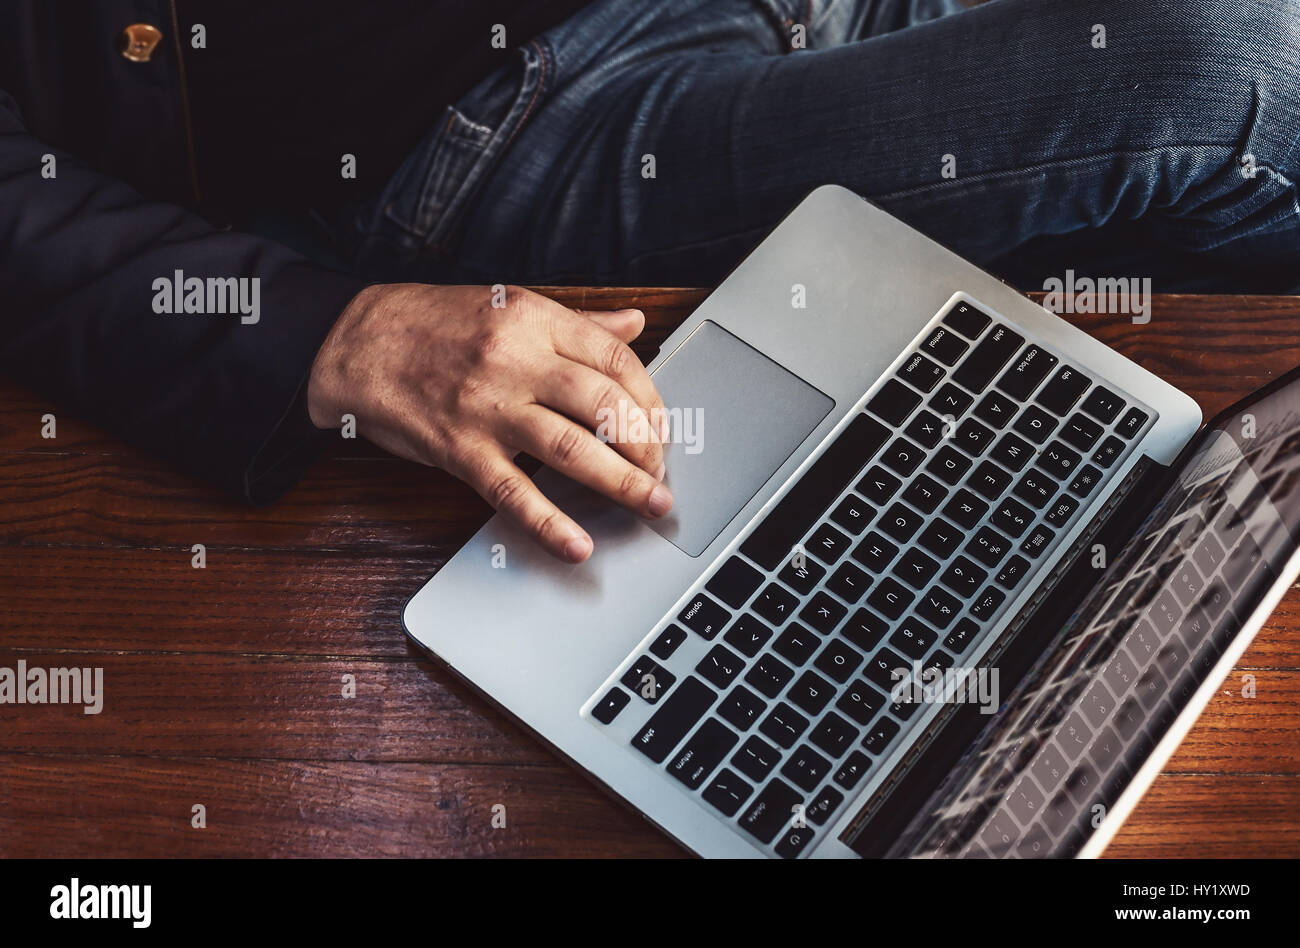 Just a man with his laptop on table. Stock Photo